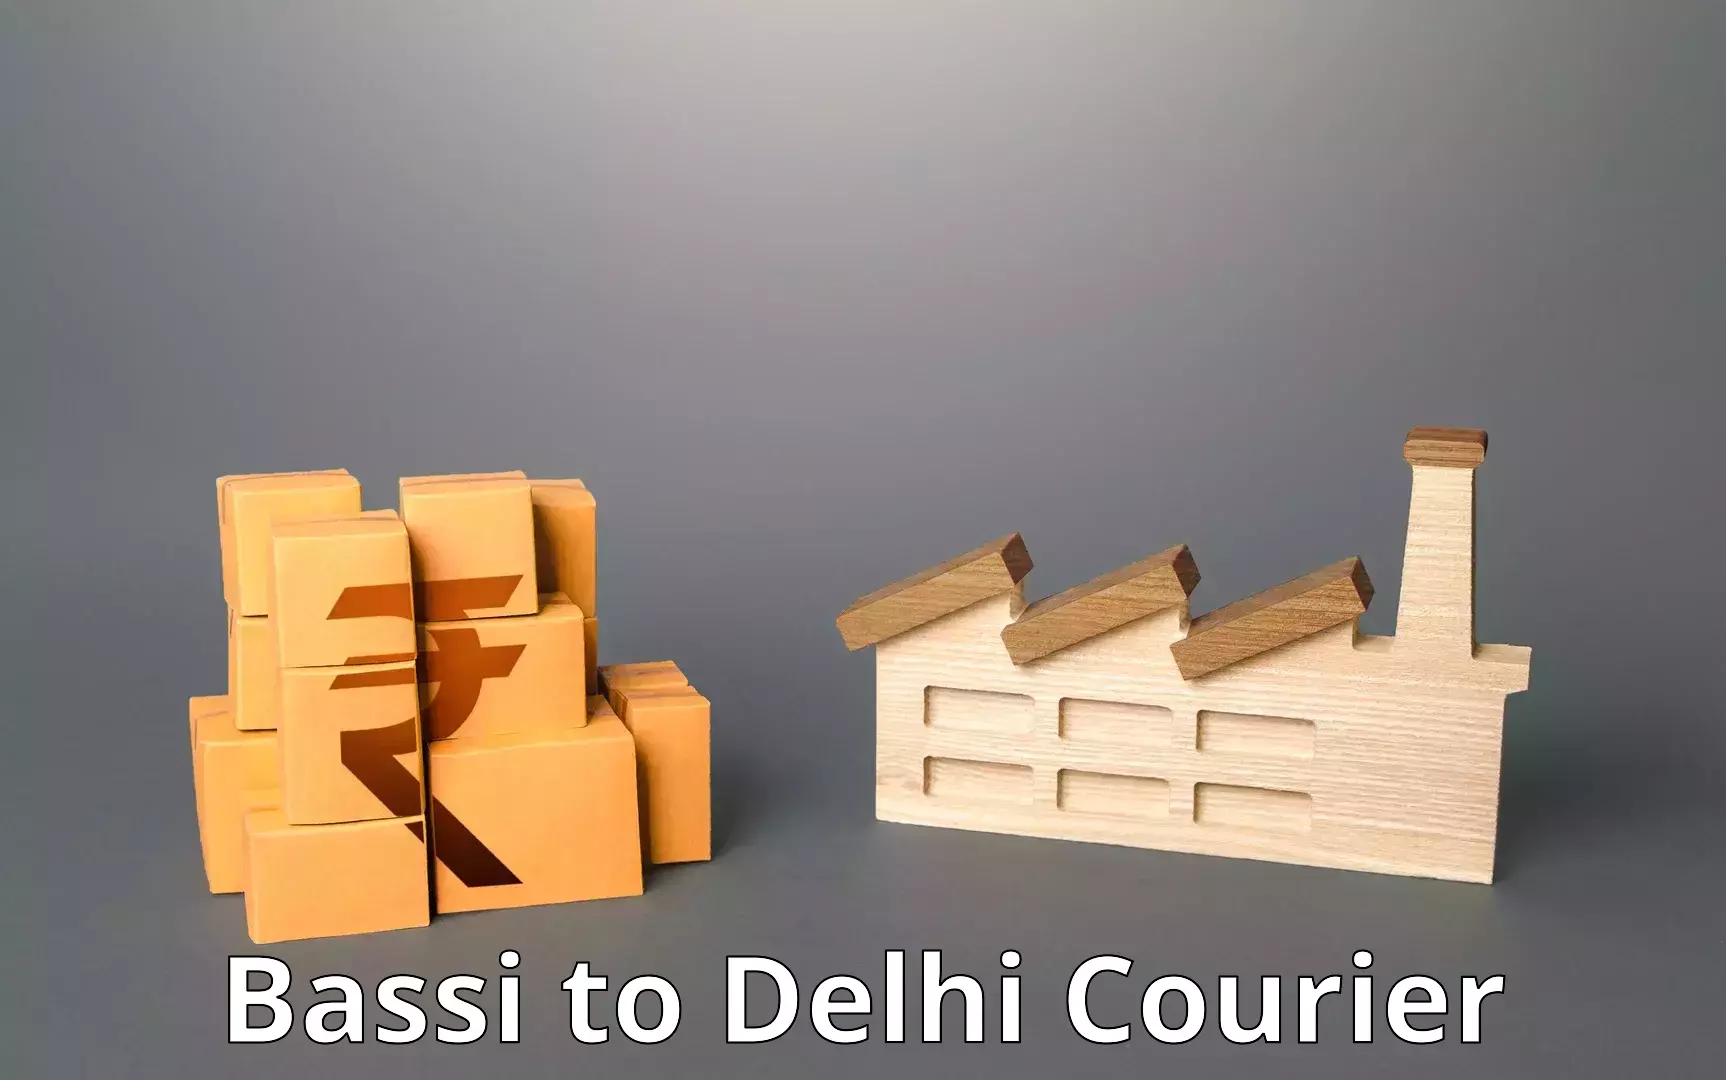 Express delivery capabilities Bassi to Delhi